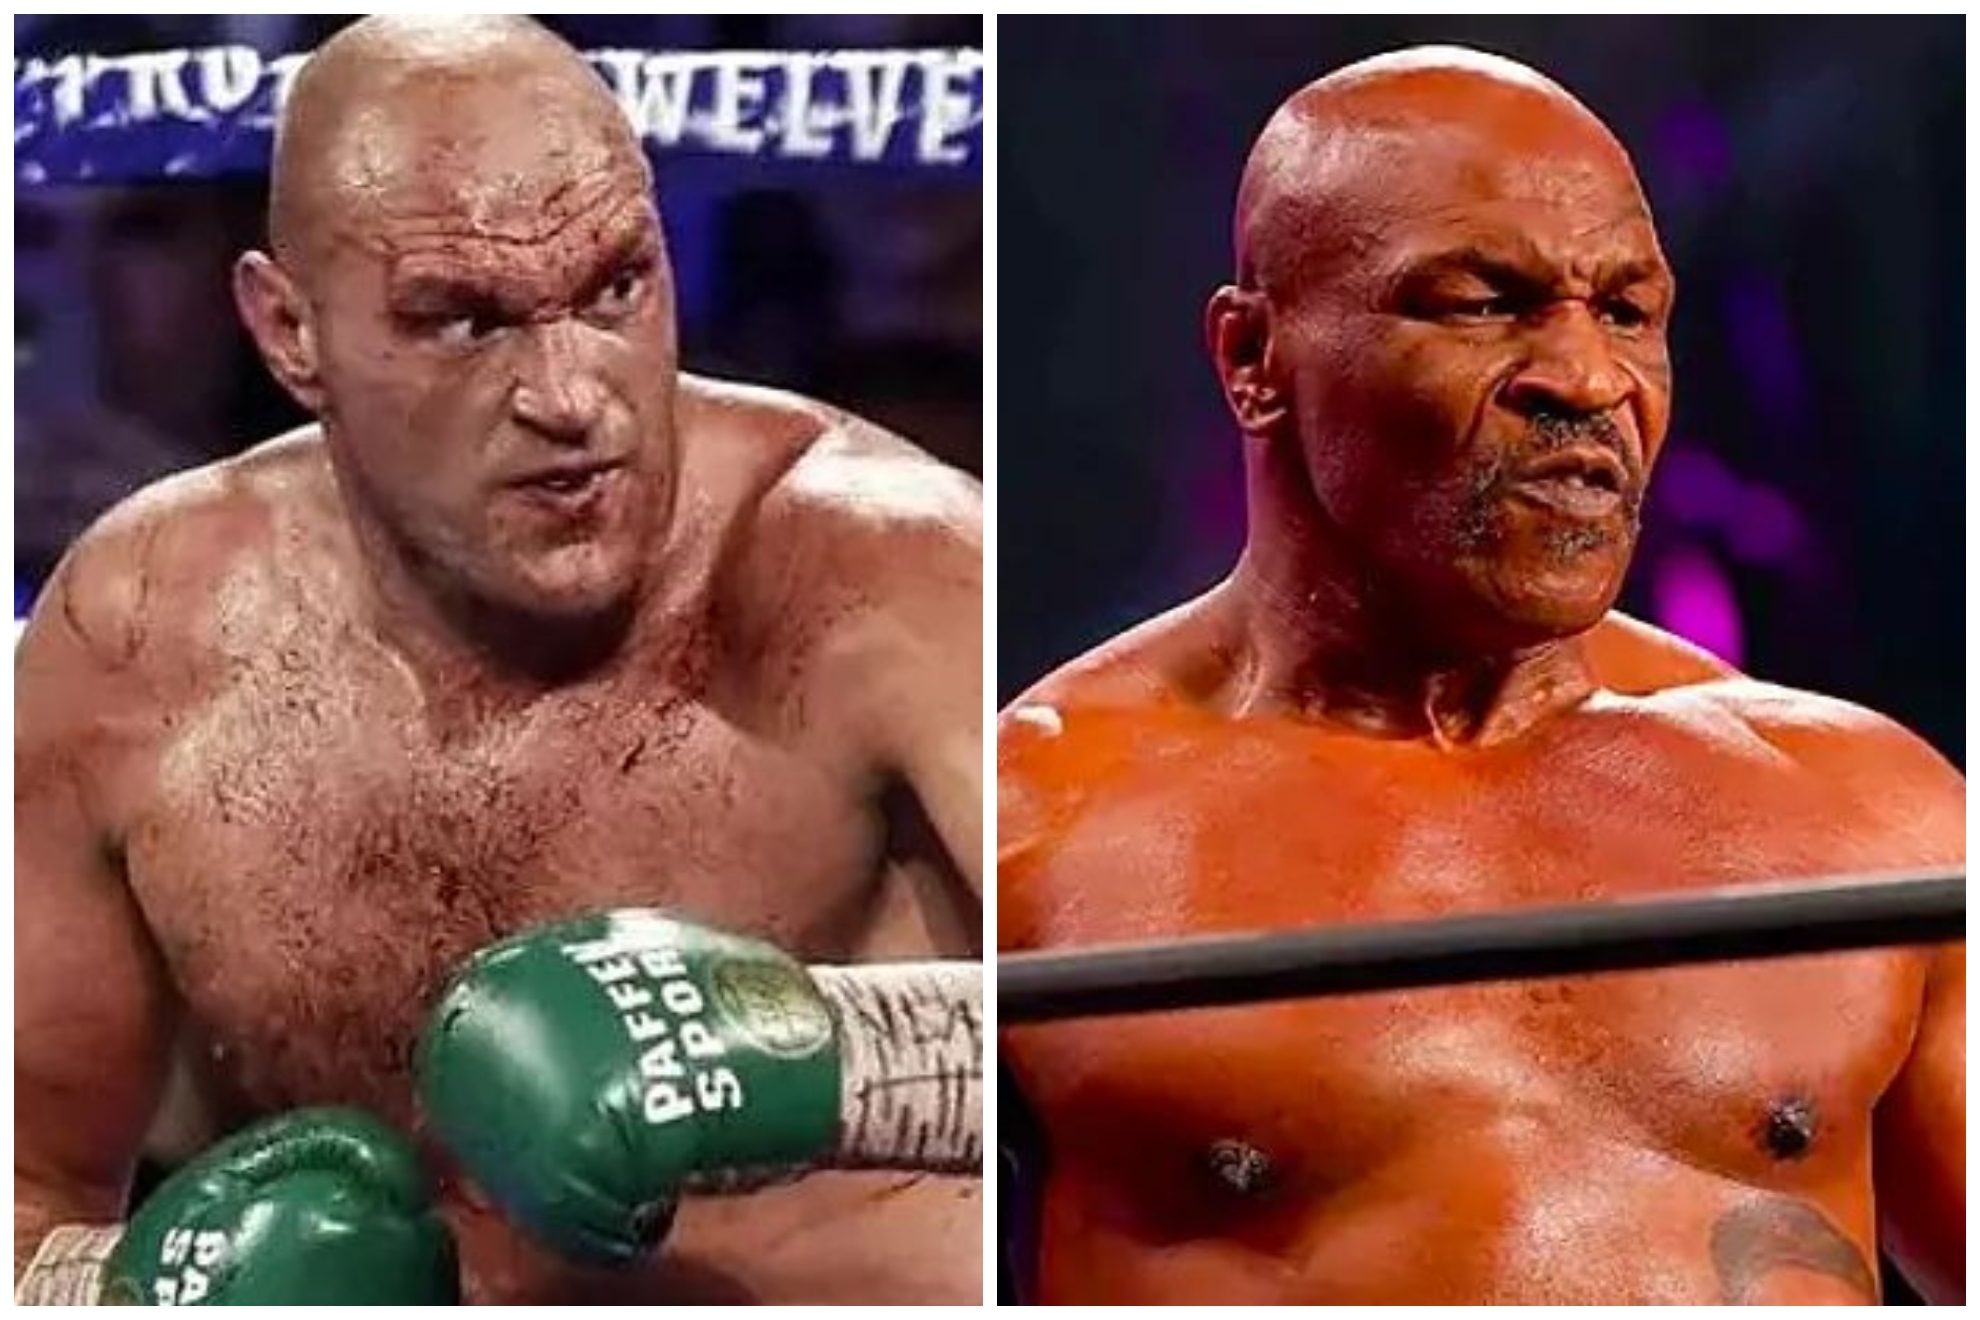 Tyson Fury and Mike Tyson